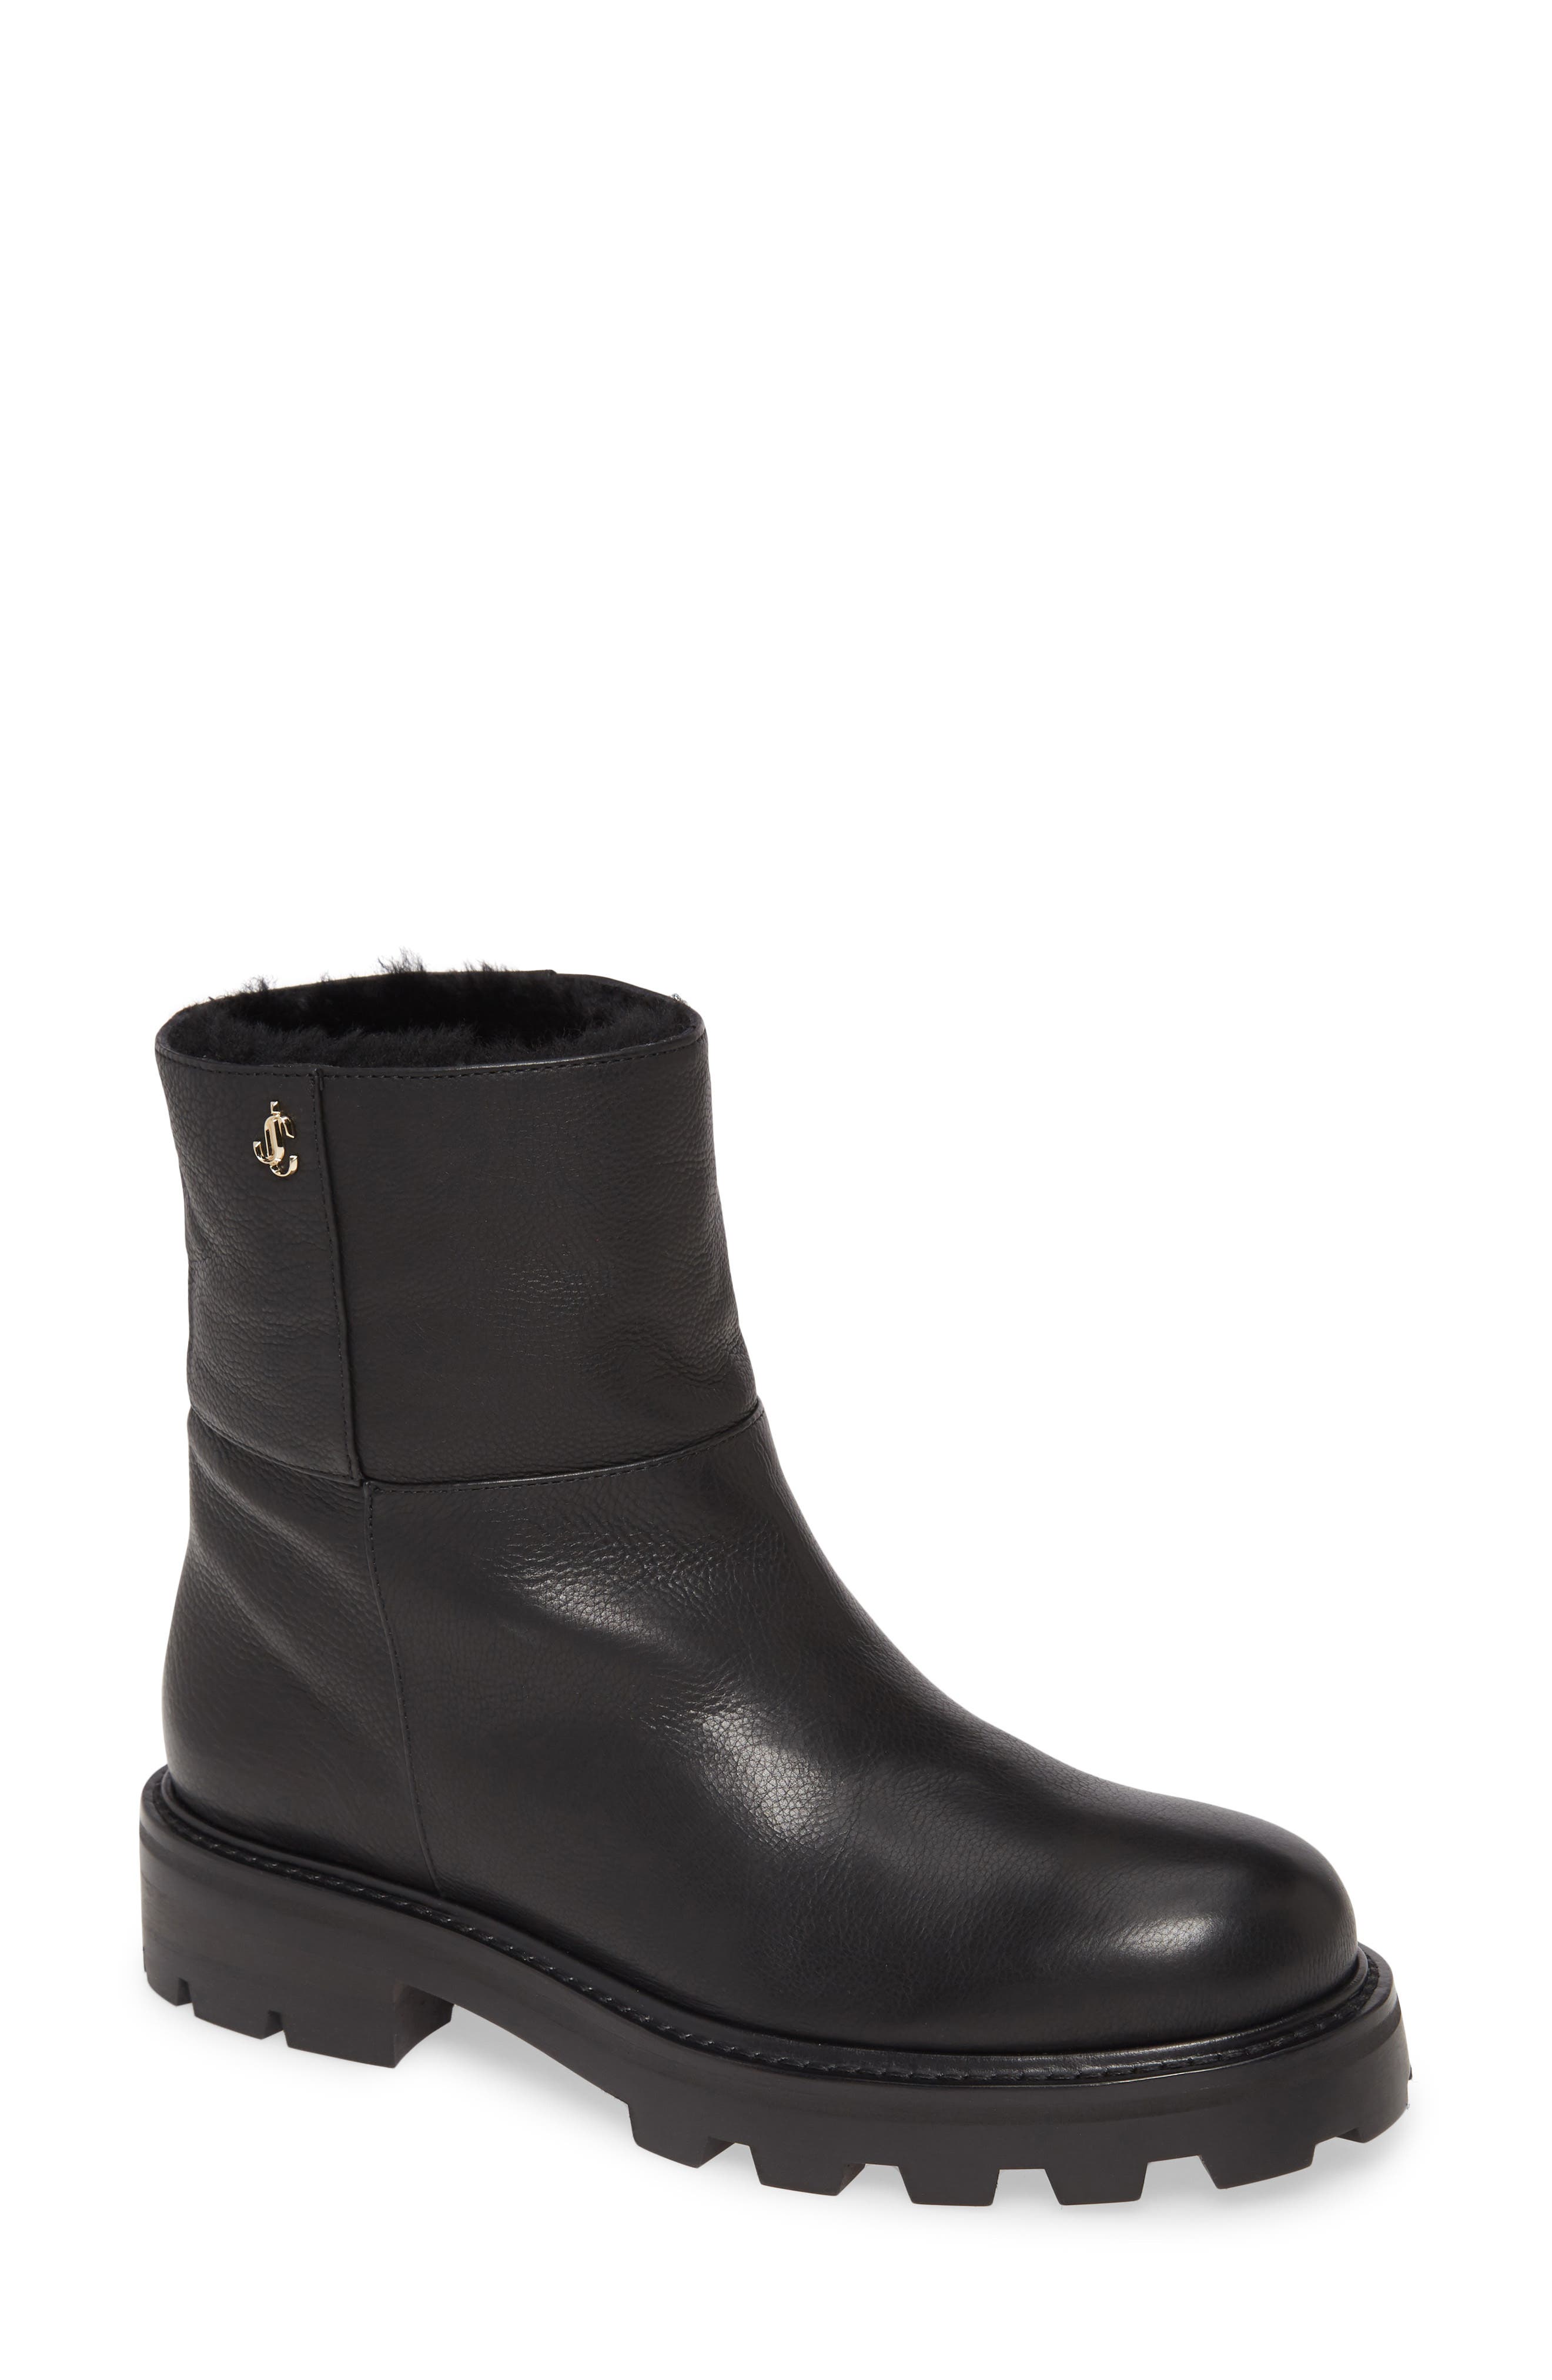 jimmy choo shearling lined boots